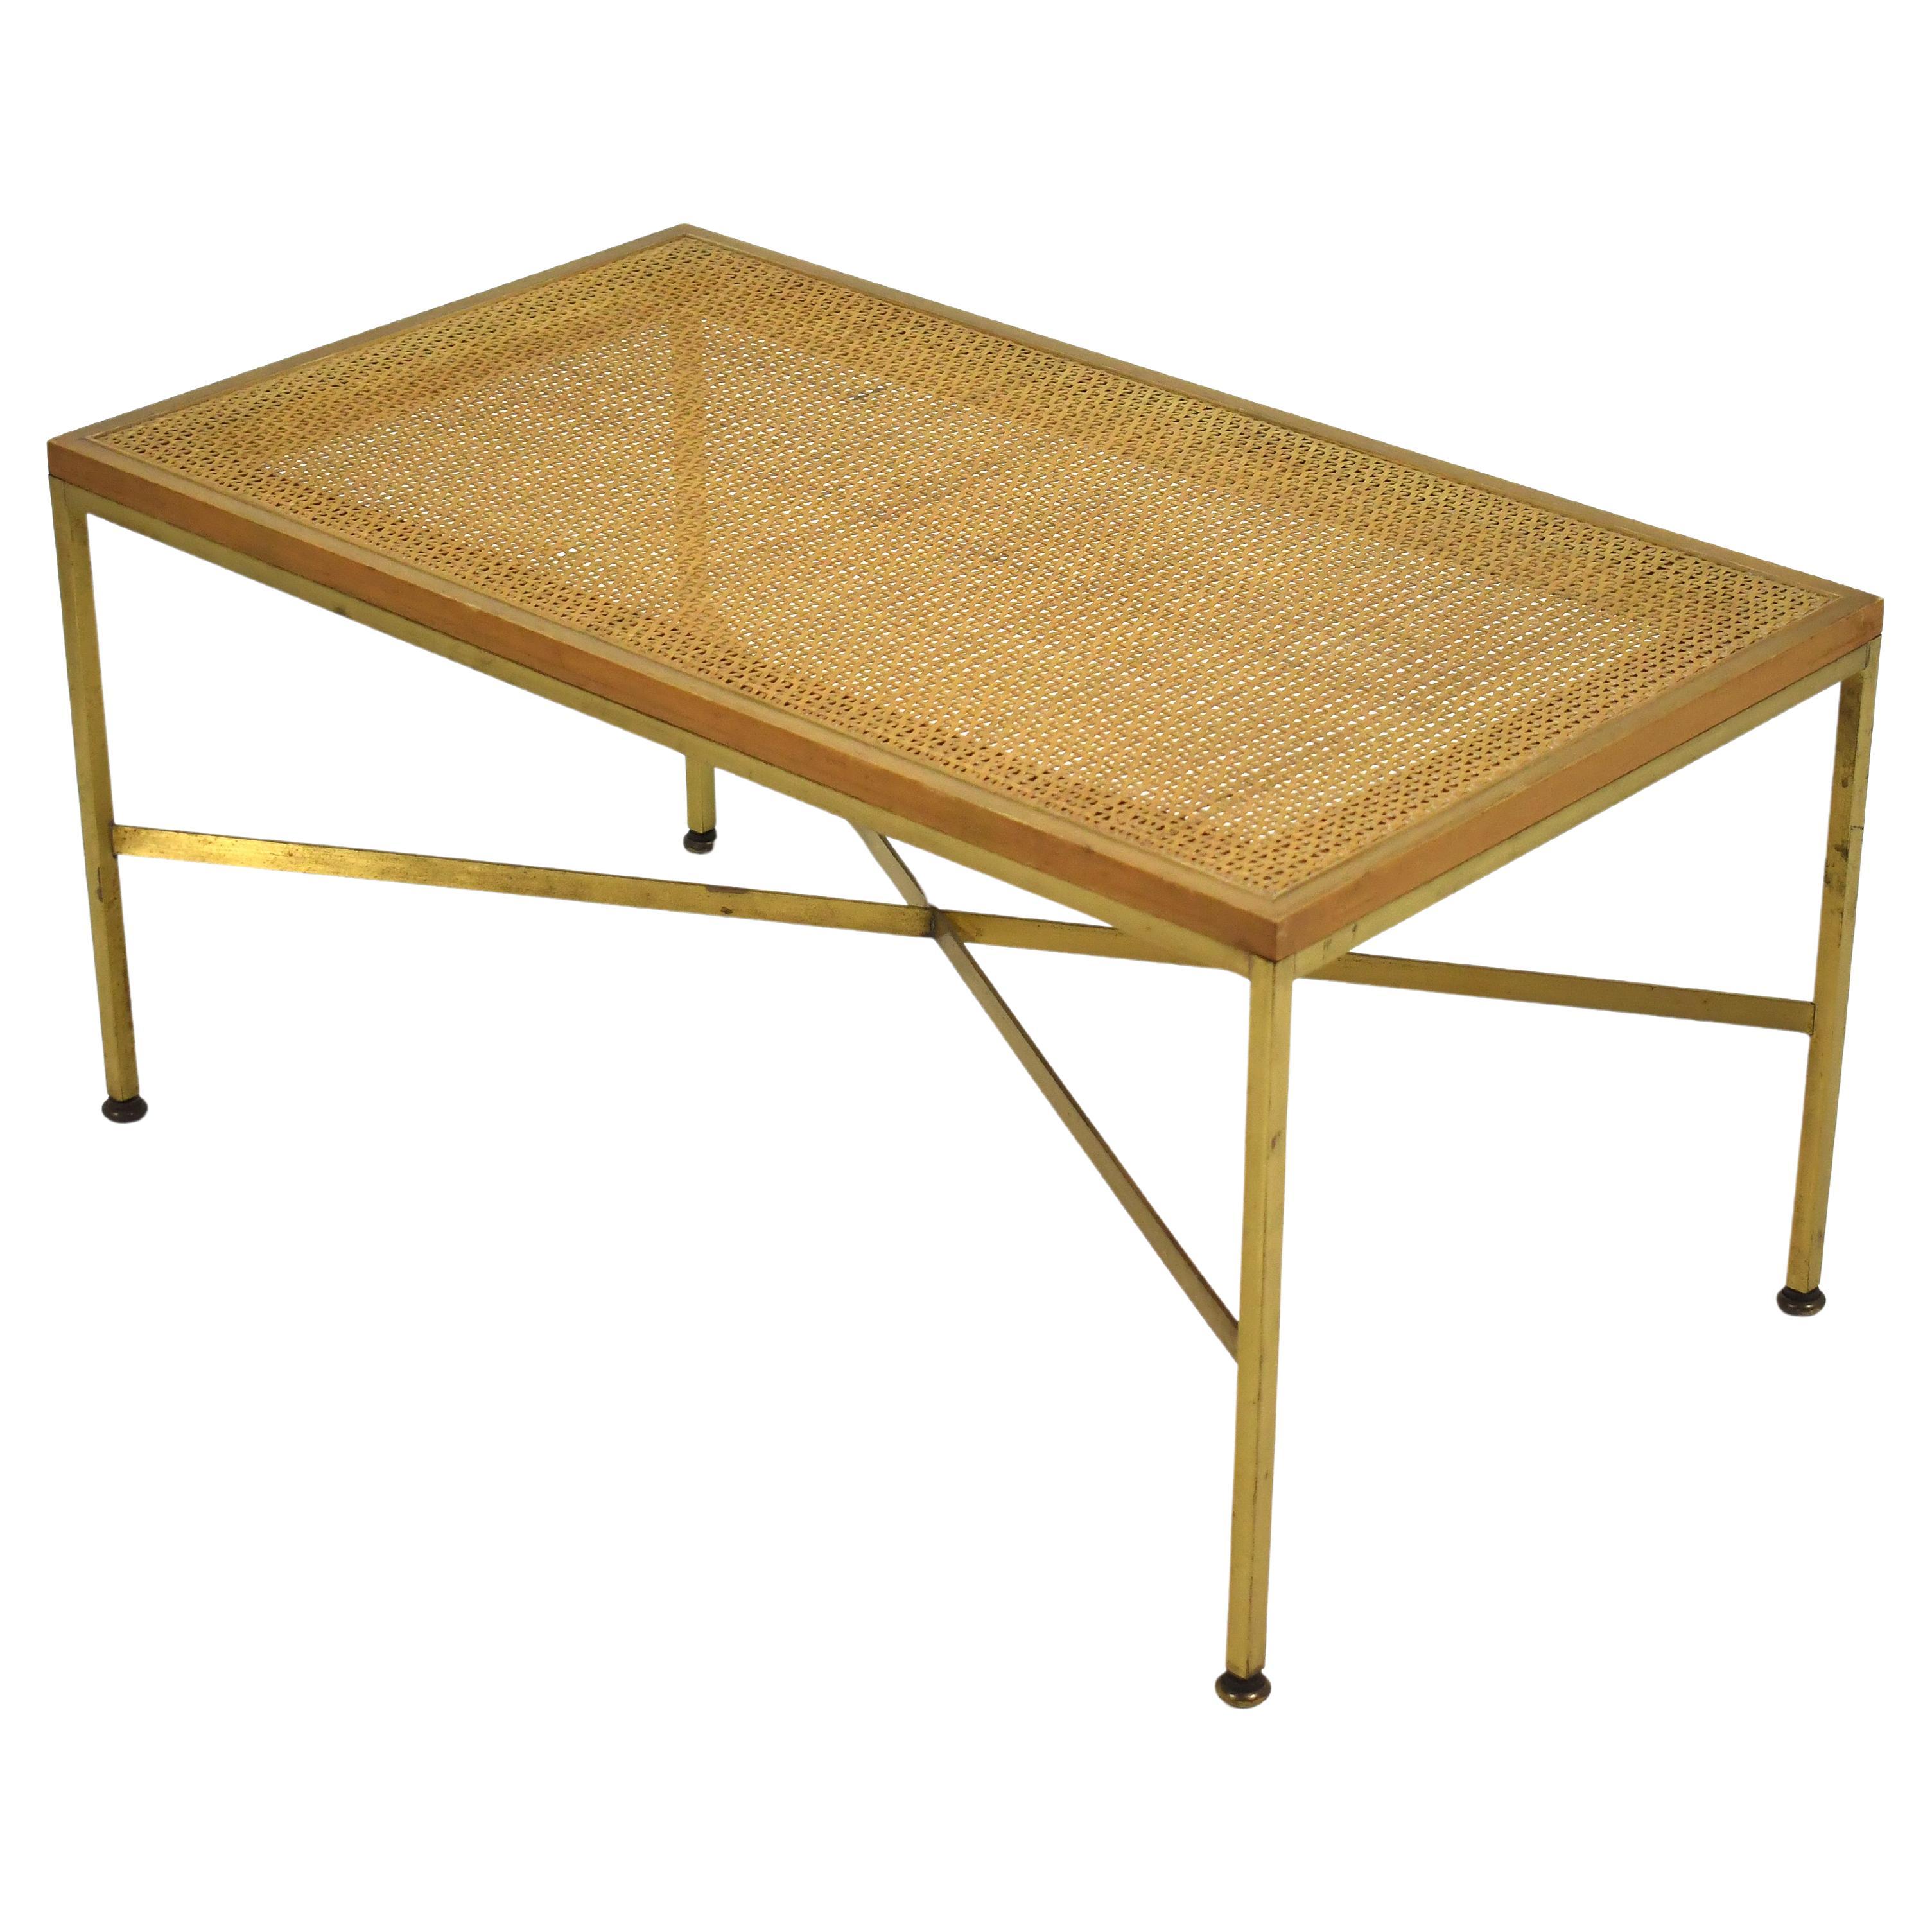 Paul McCobb Brass & Cane Bench For Sale